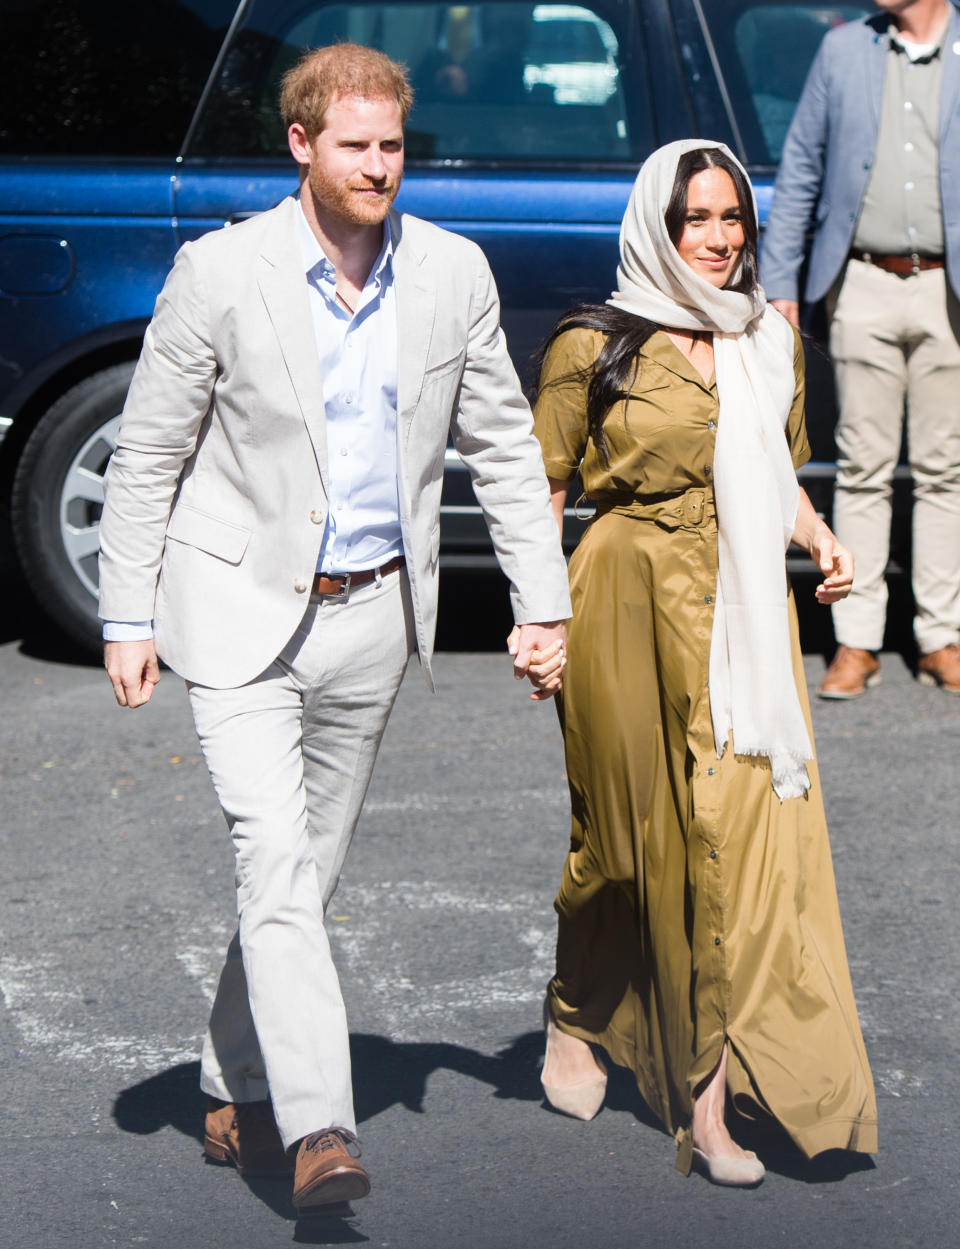 Prince Harry and Meghan Markle visit the Auwal Mosque in Cape Town, South Africa. (Photo: Samir Hussein/WireImage)